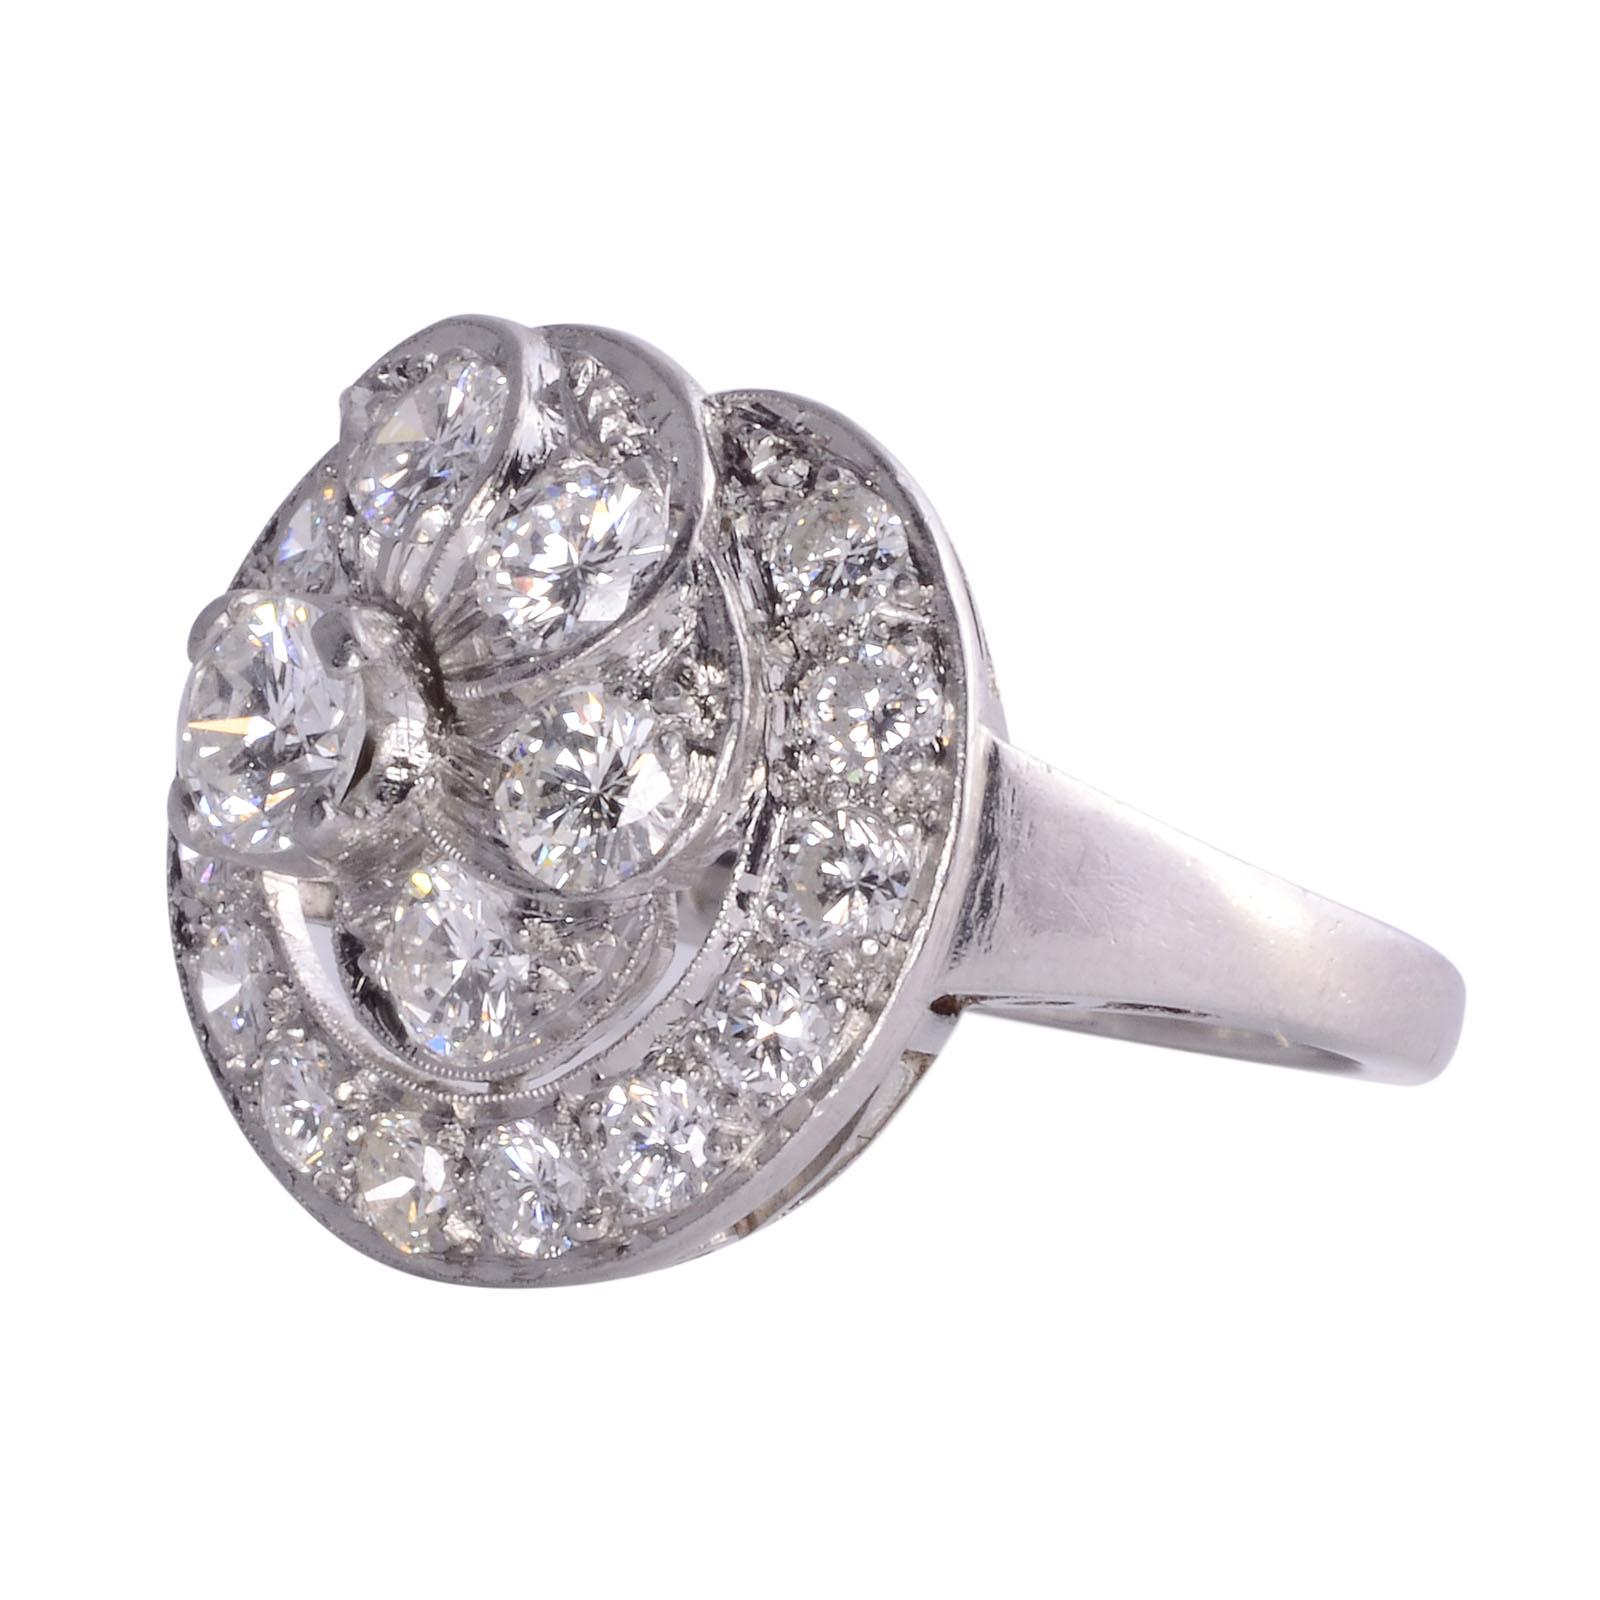 Vintage diamond cluster platinum ring, circa 1940. This vintage platinum ring features a center round brilliant diamond at .27 carat with VS clarity and H-I color. There are four more diamonds set in the petals at .50 carat total weight having